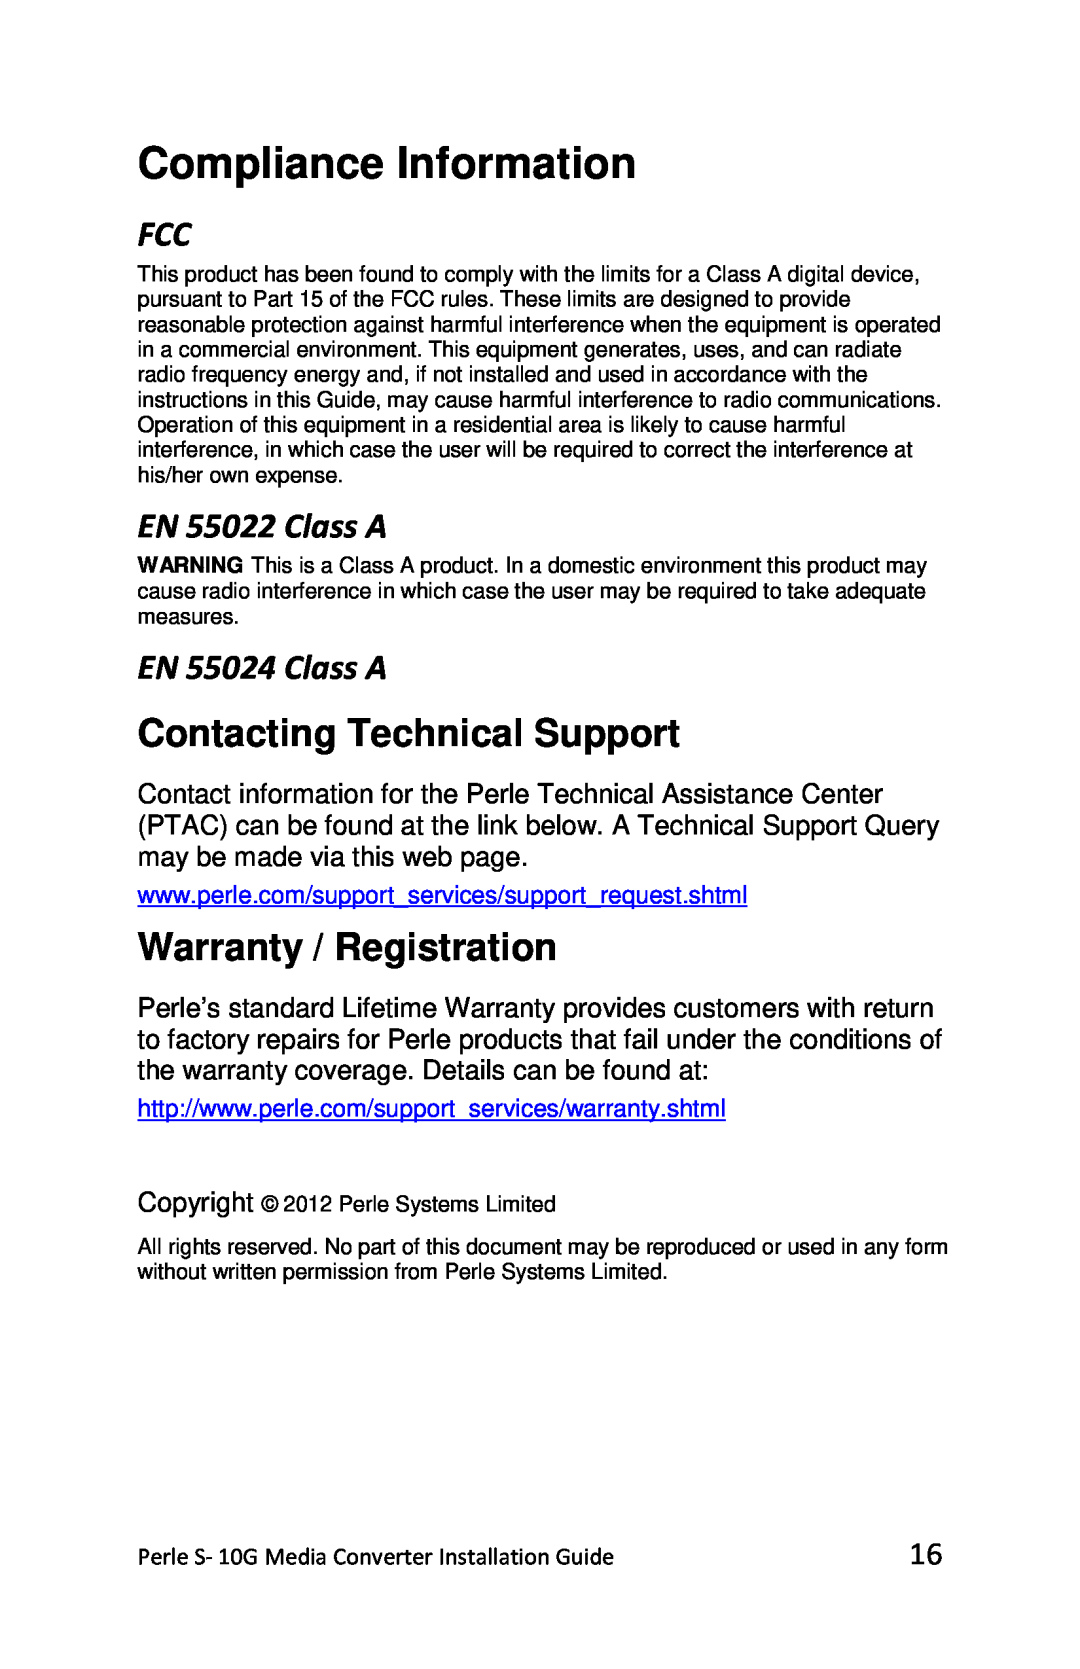 Perle Systems S-10G-XTX Compliance Information, Contacting Technical Support, Warranty / Registration, EN 55022 Class A 